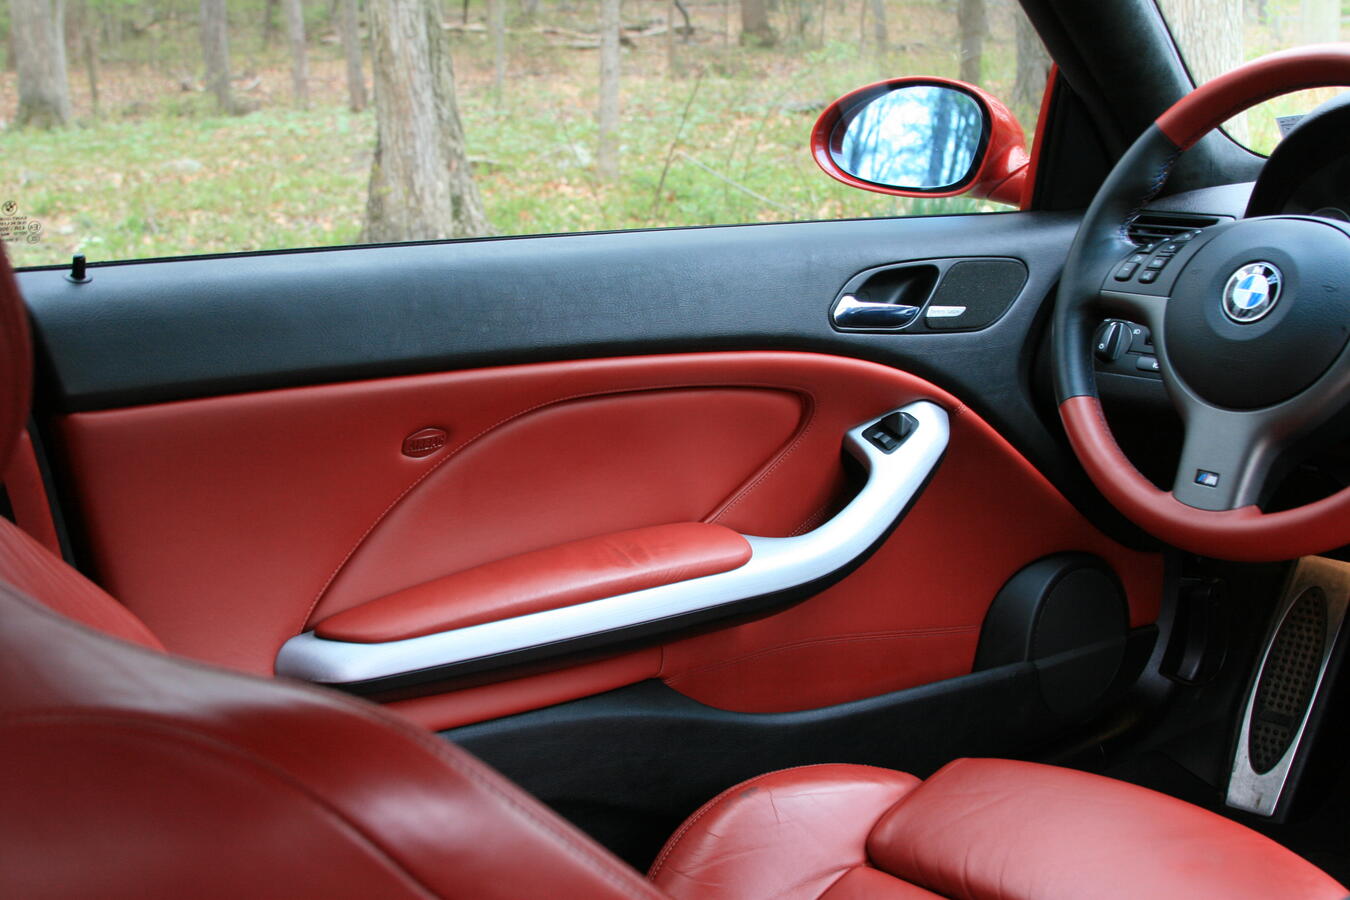 Cleaning the M3 and M5 Leather Interiors with Bick 4 